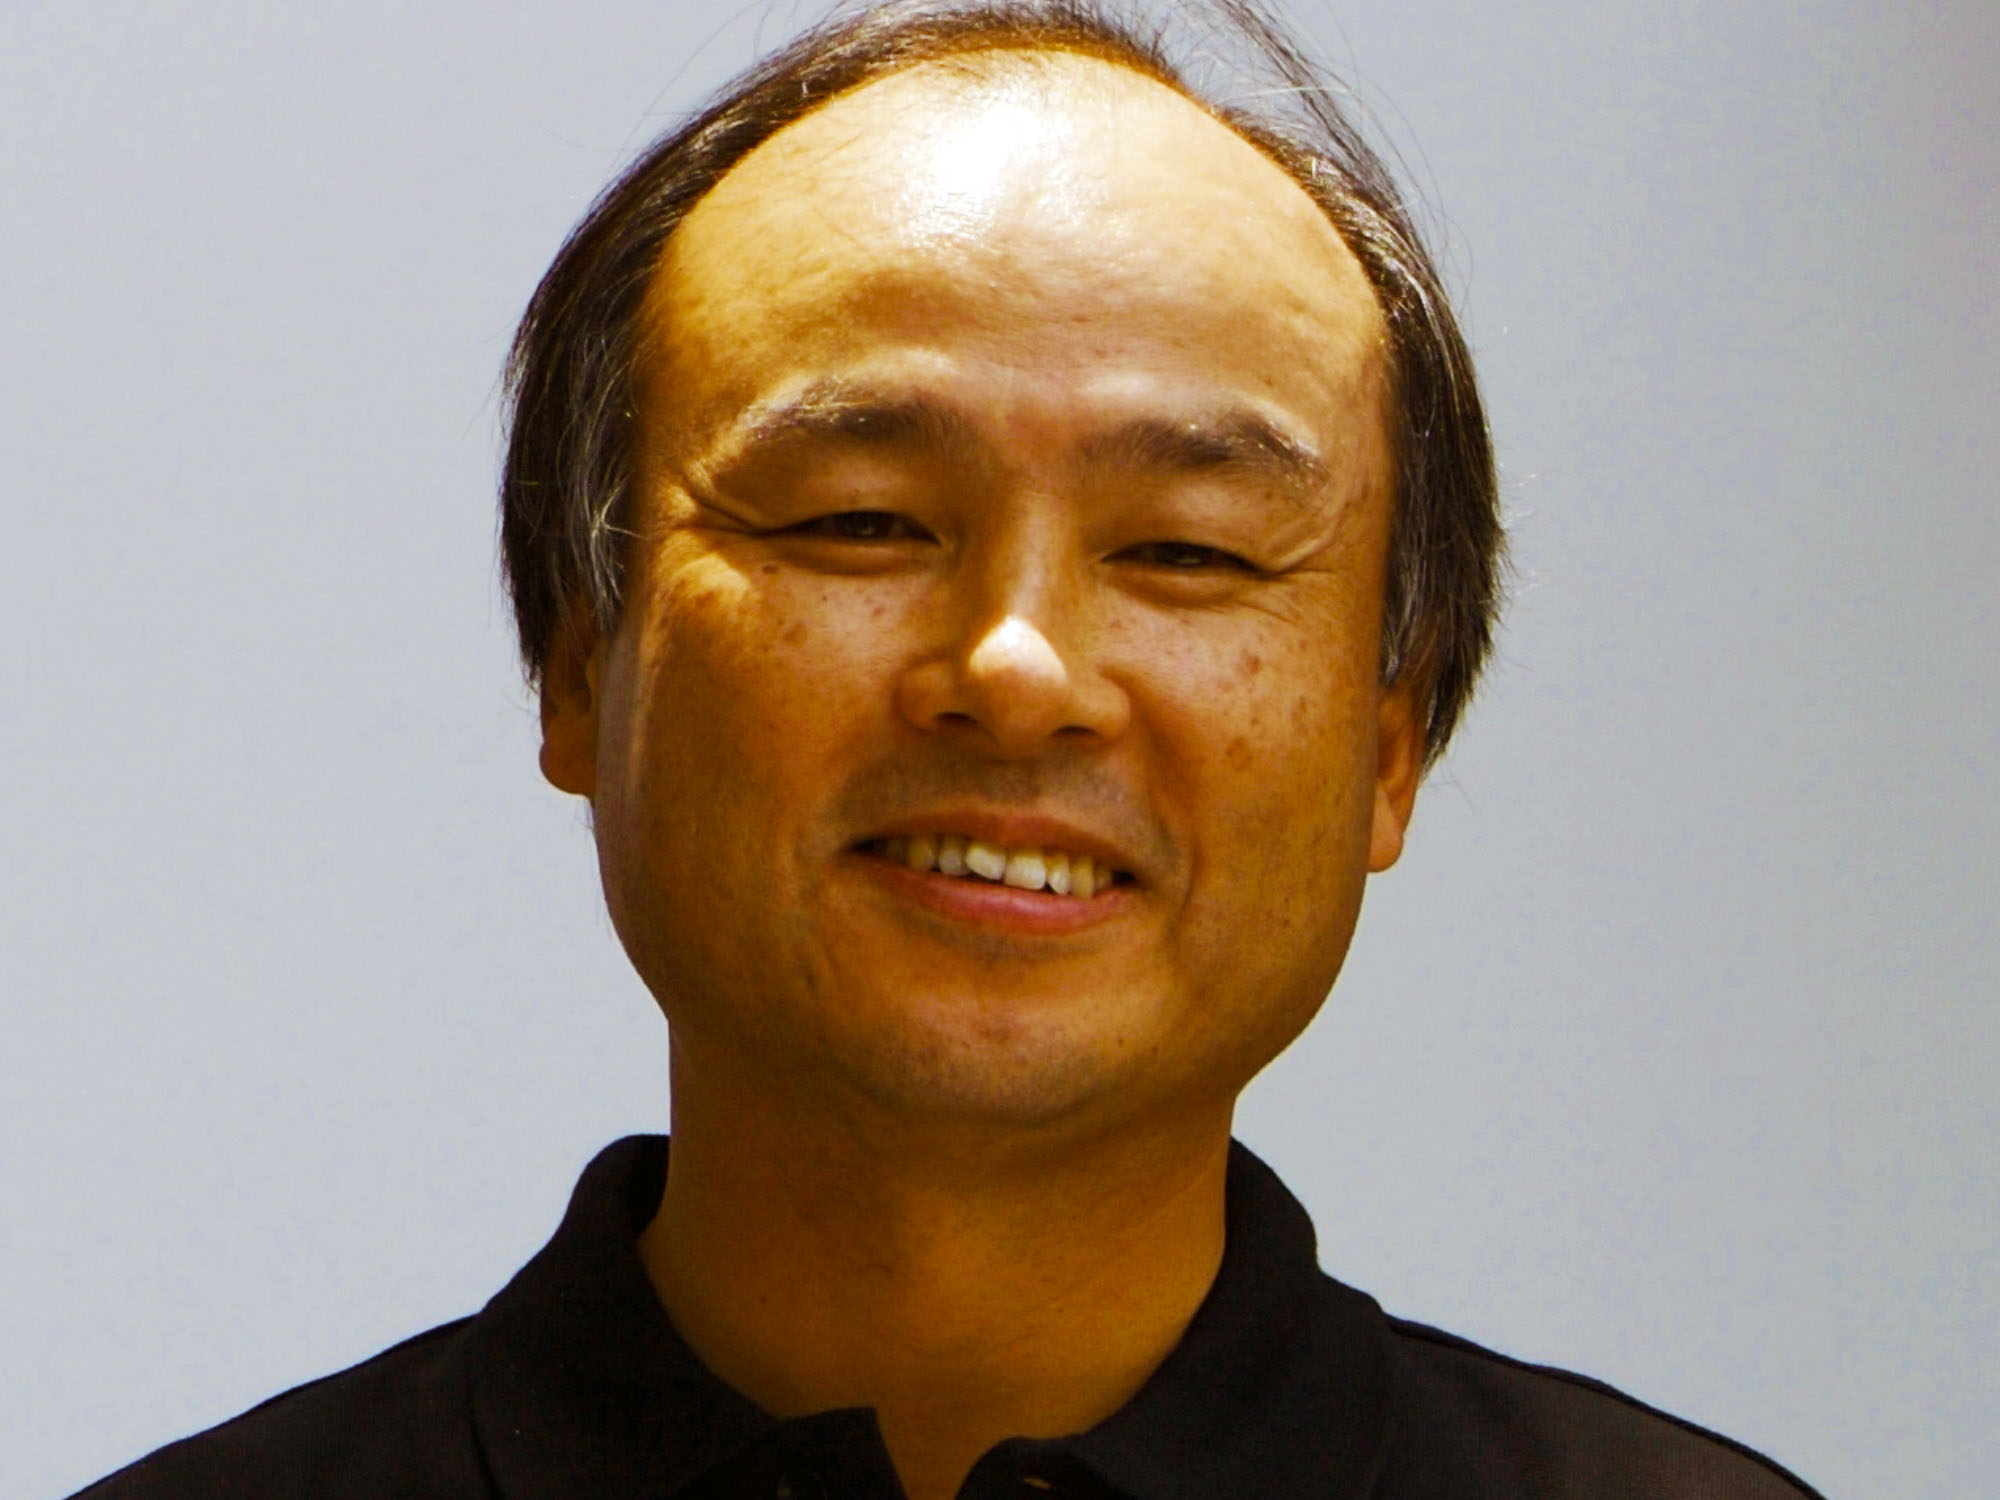 Masayoshi Son: “I am a man – and I want to be Number 1”